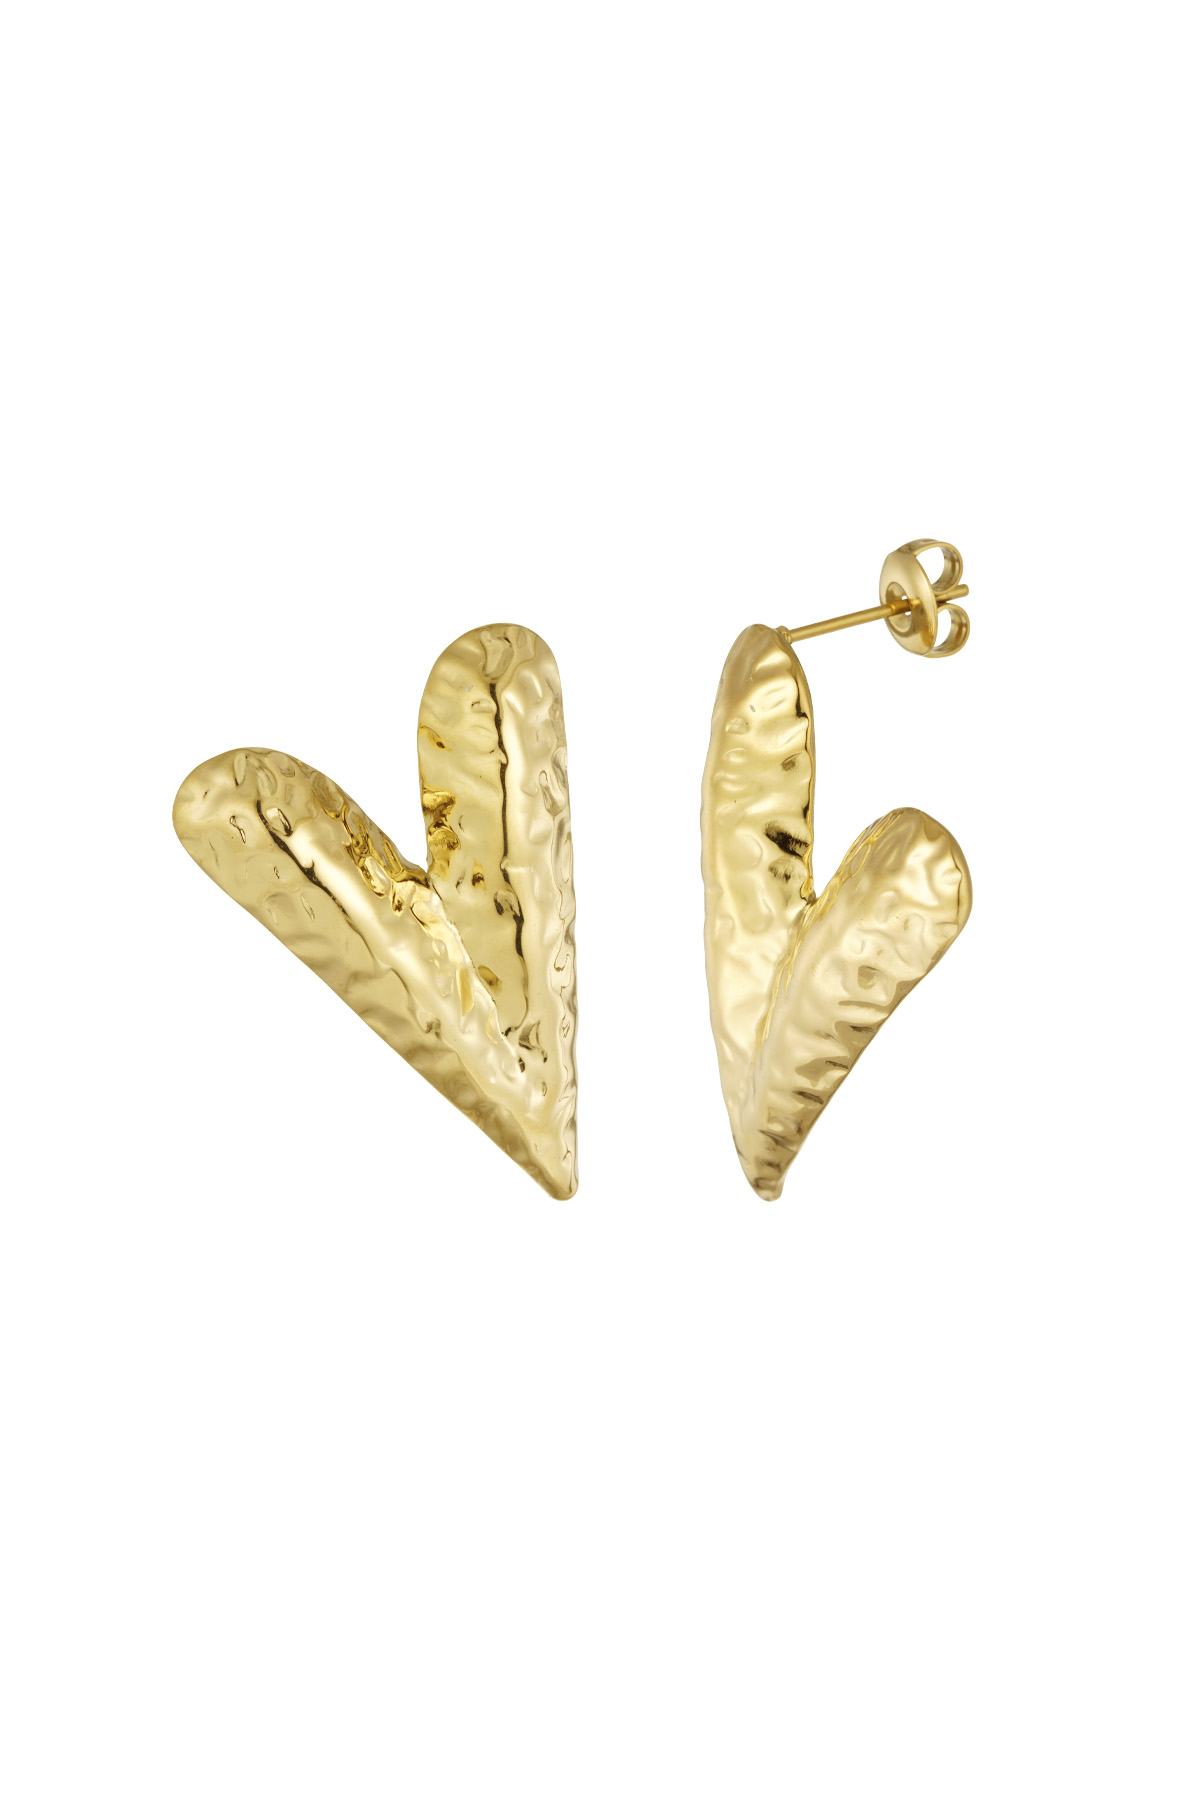 Stud earrings all yours - gold